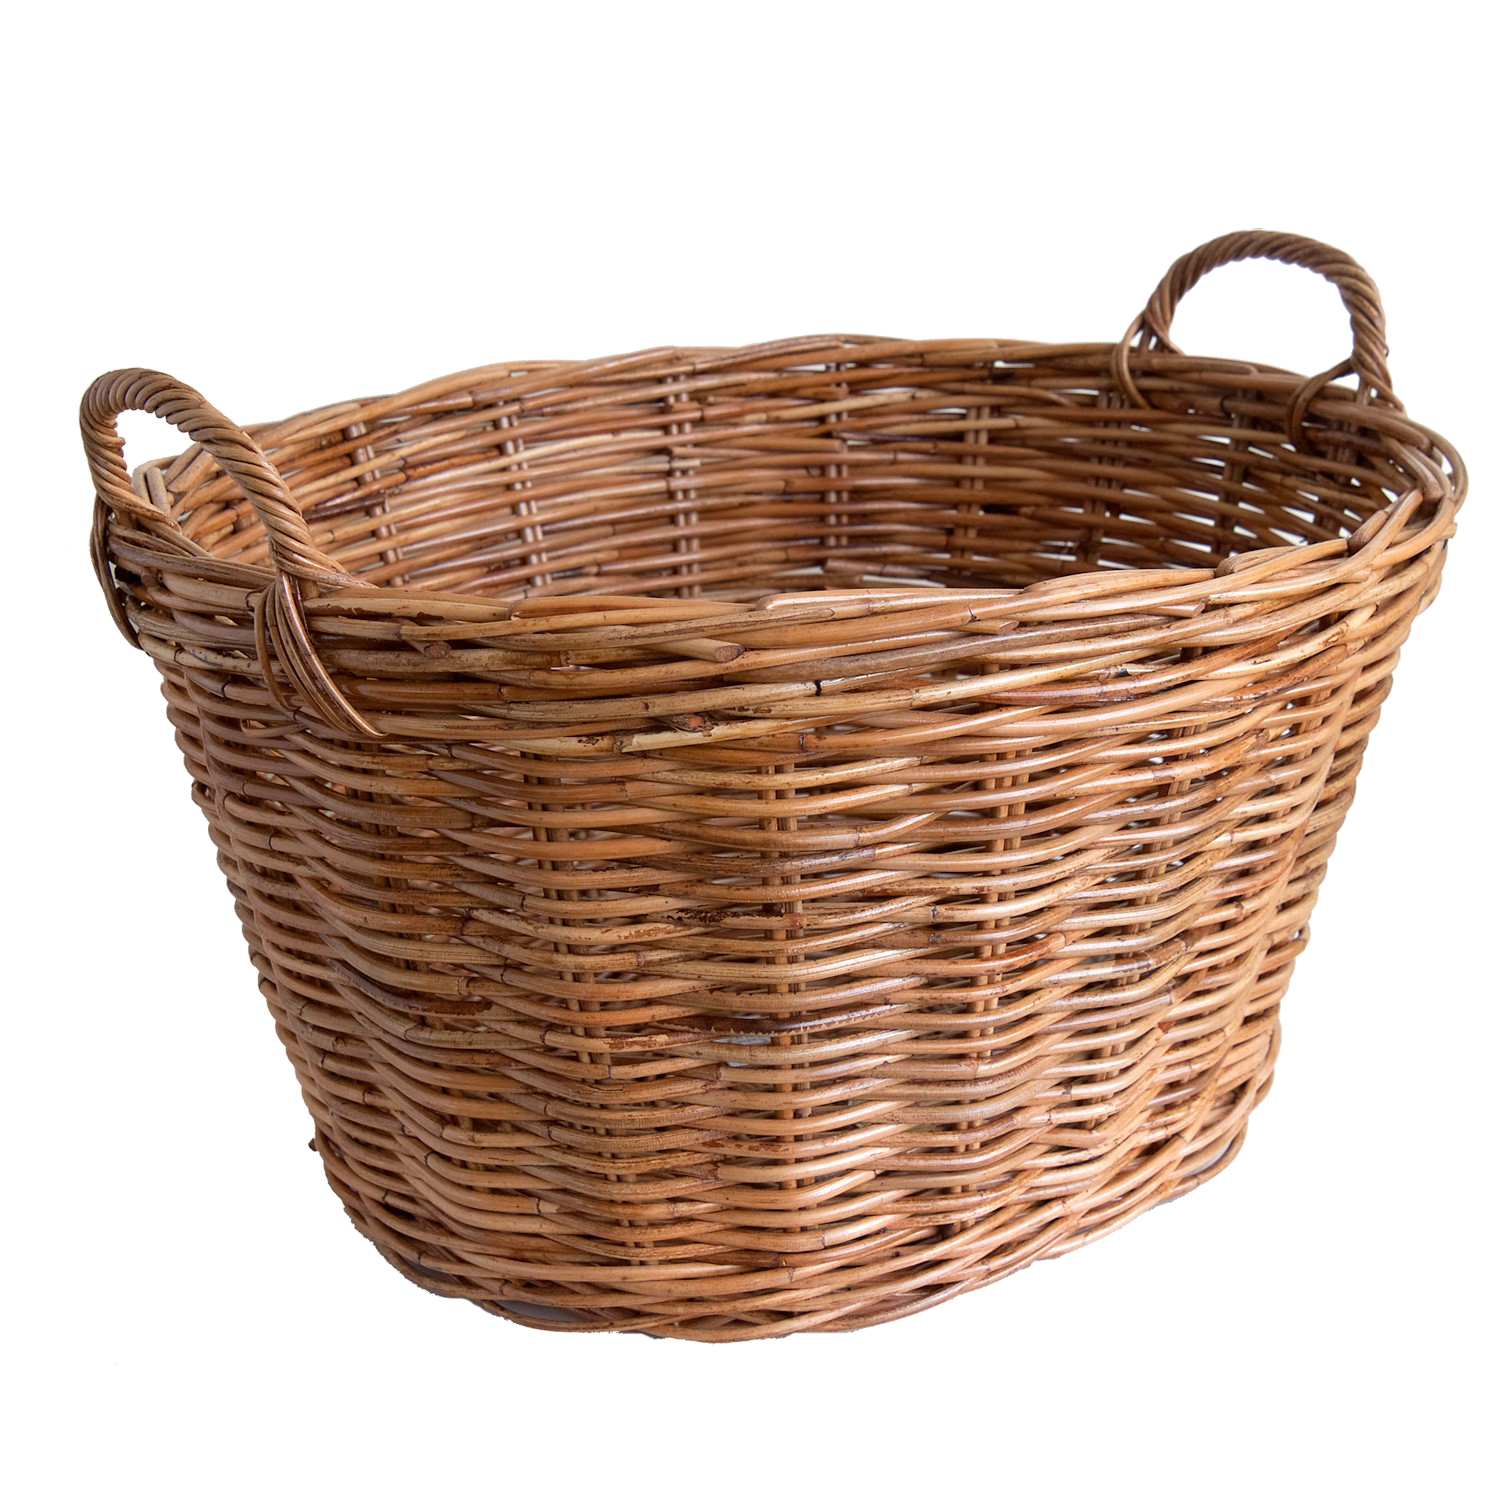 Wicker PNG Transparent Image